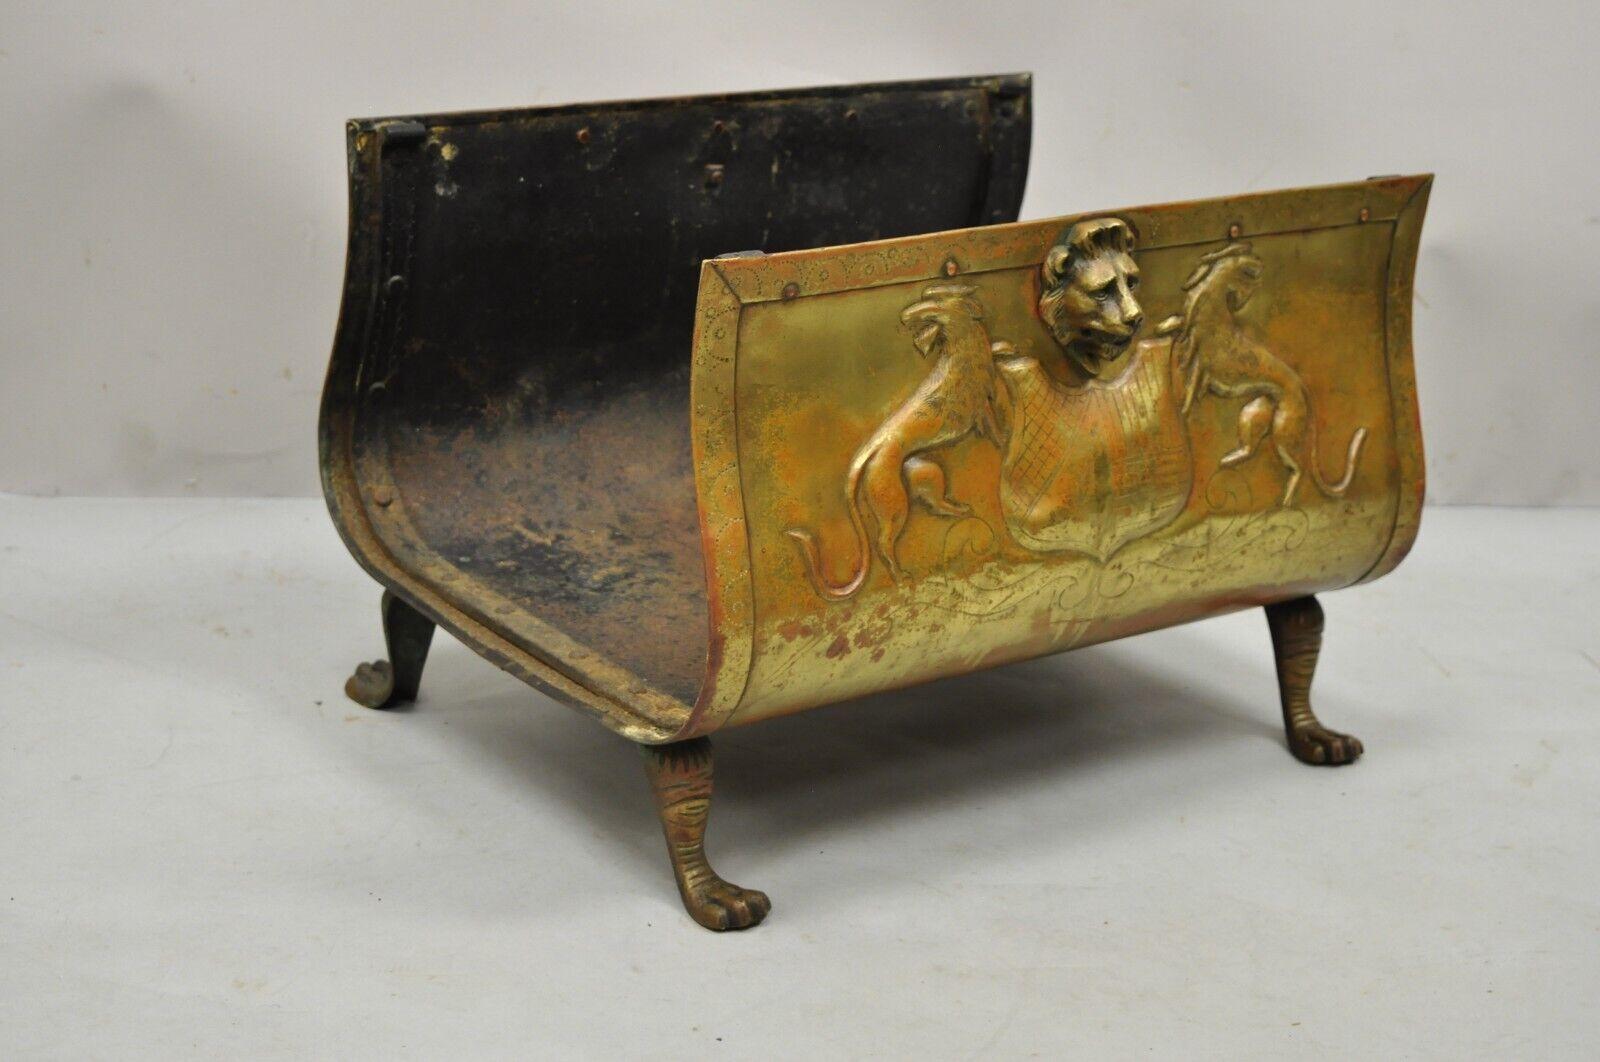 Antique French empire brass and cast iron fireplace log holder with shield lions. Item features debossed lions and shields, griffin figures, paw feet, desirable patina, very nice antique item, quality craftsmanship, great style and form. Circa 19th